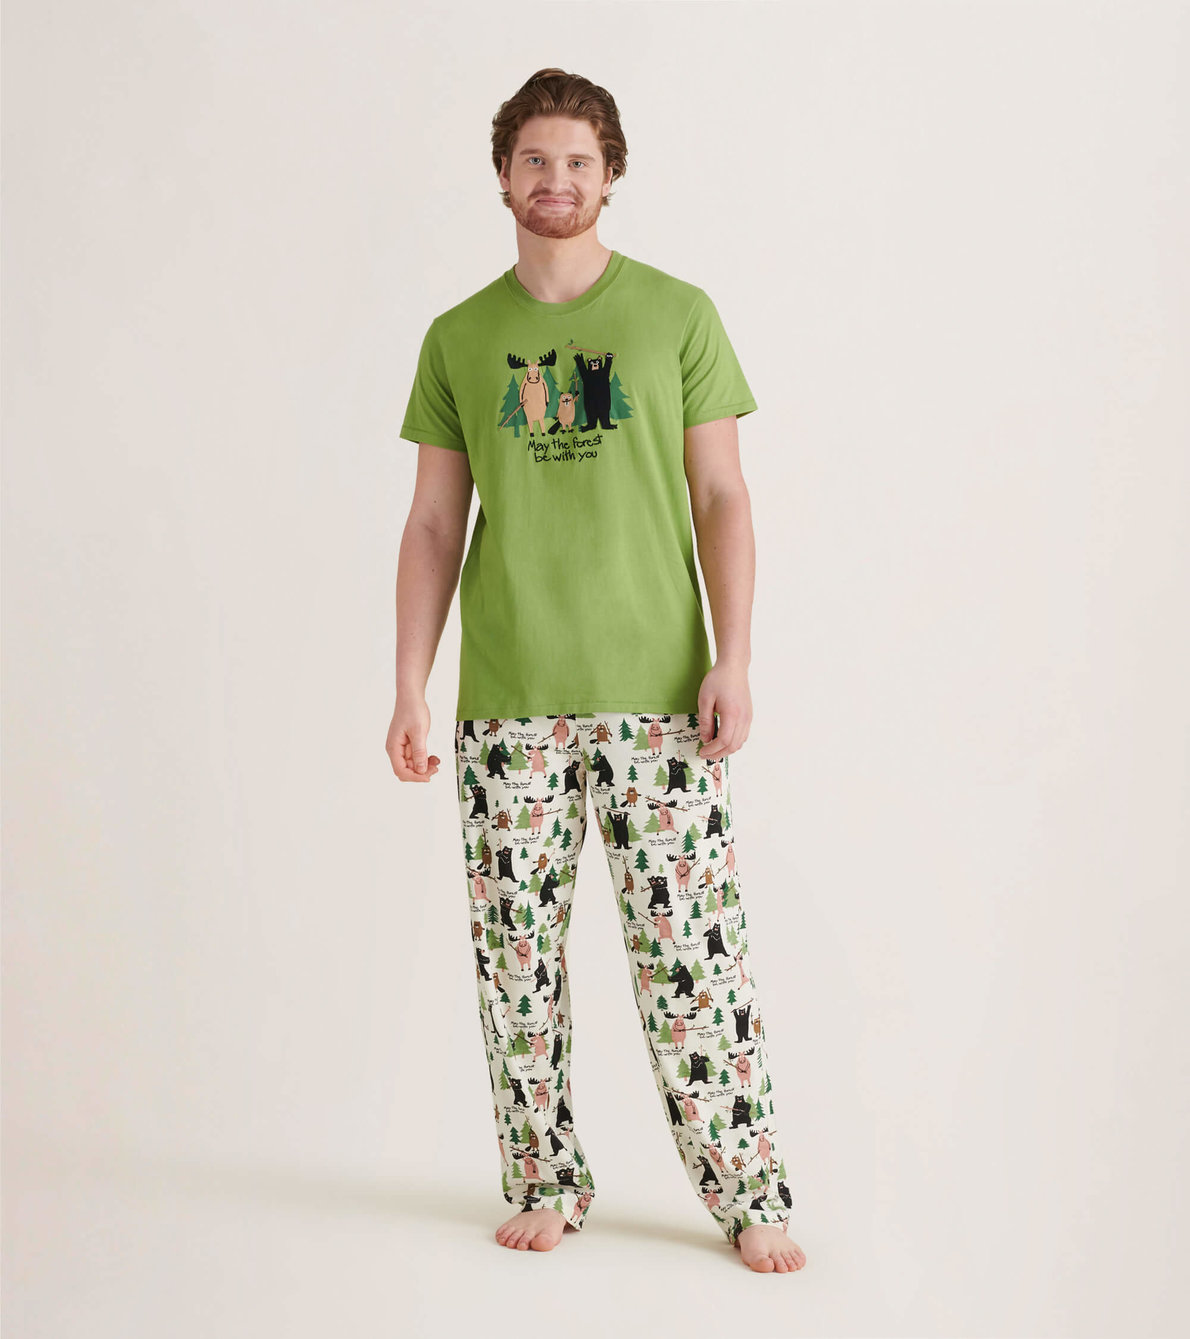 View larger image of May The Forest Be With You Men's Tee and Pants Pajama Separates